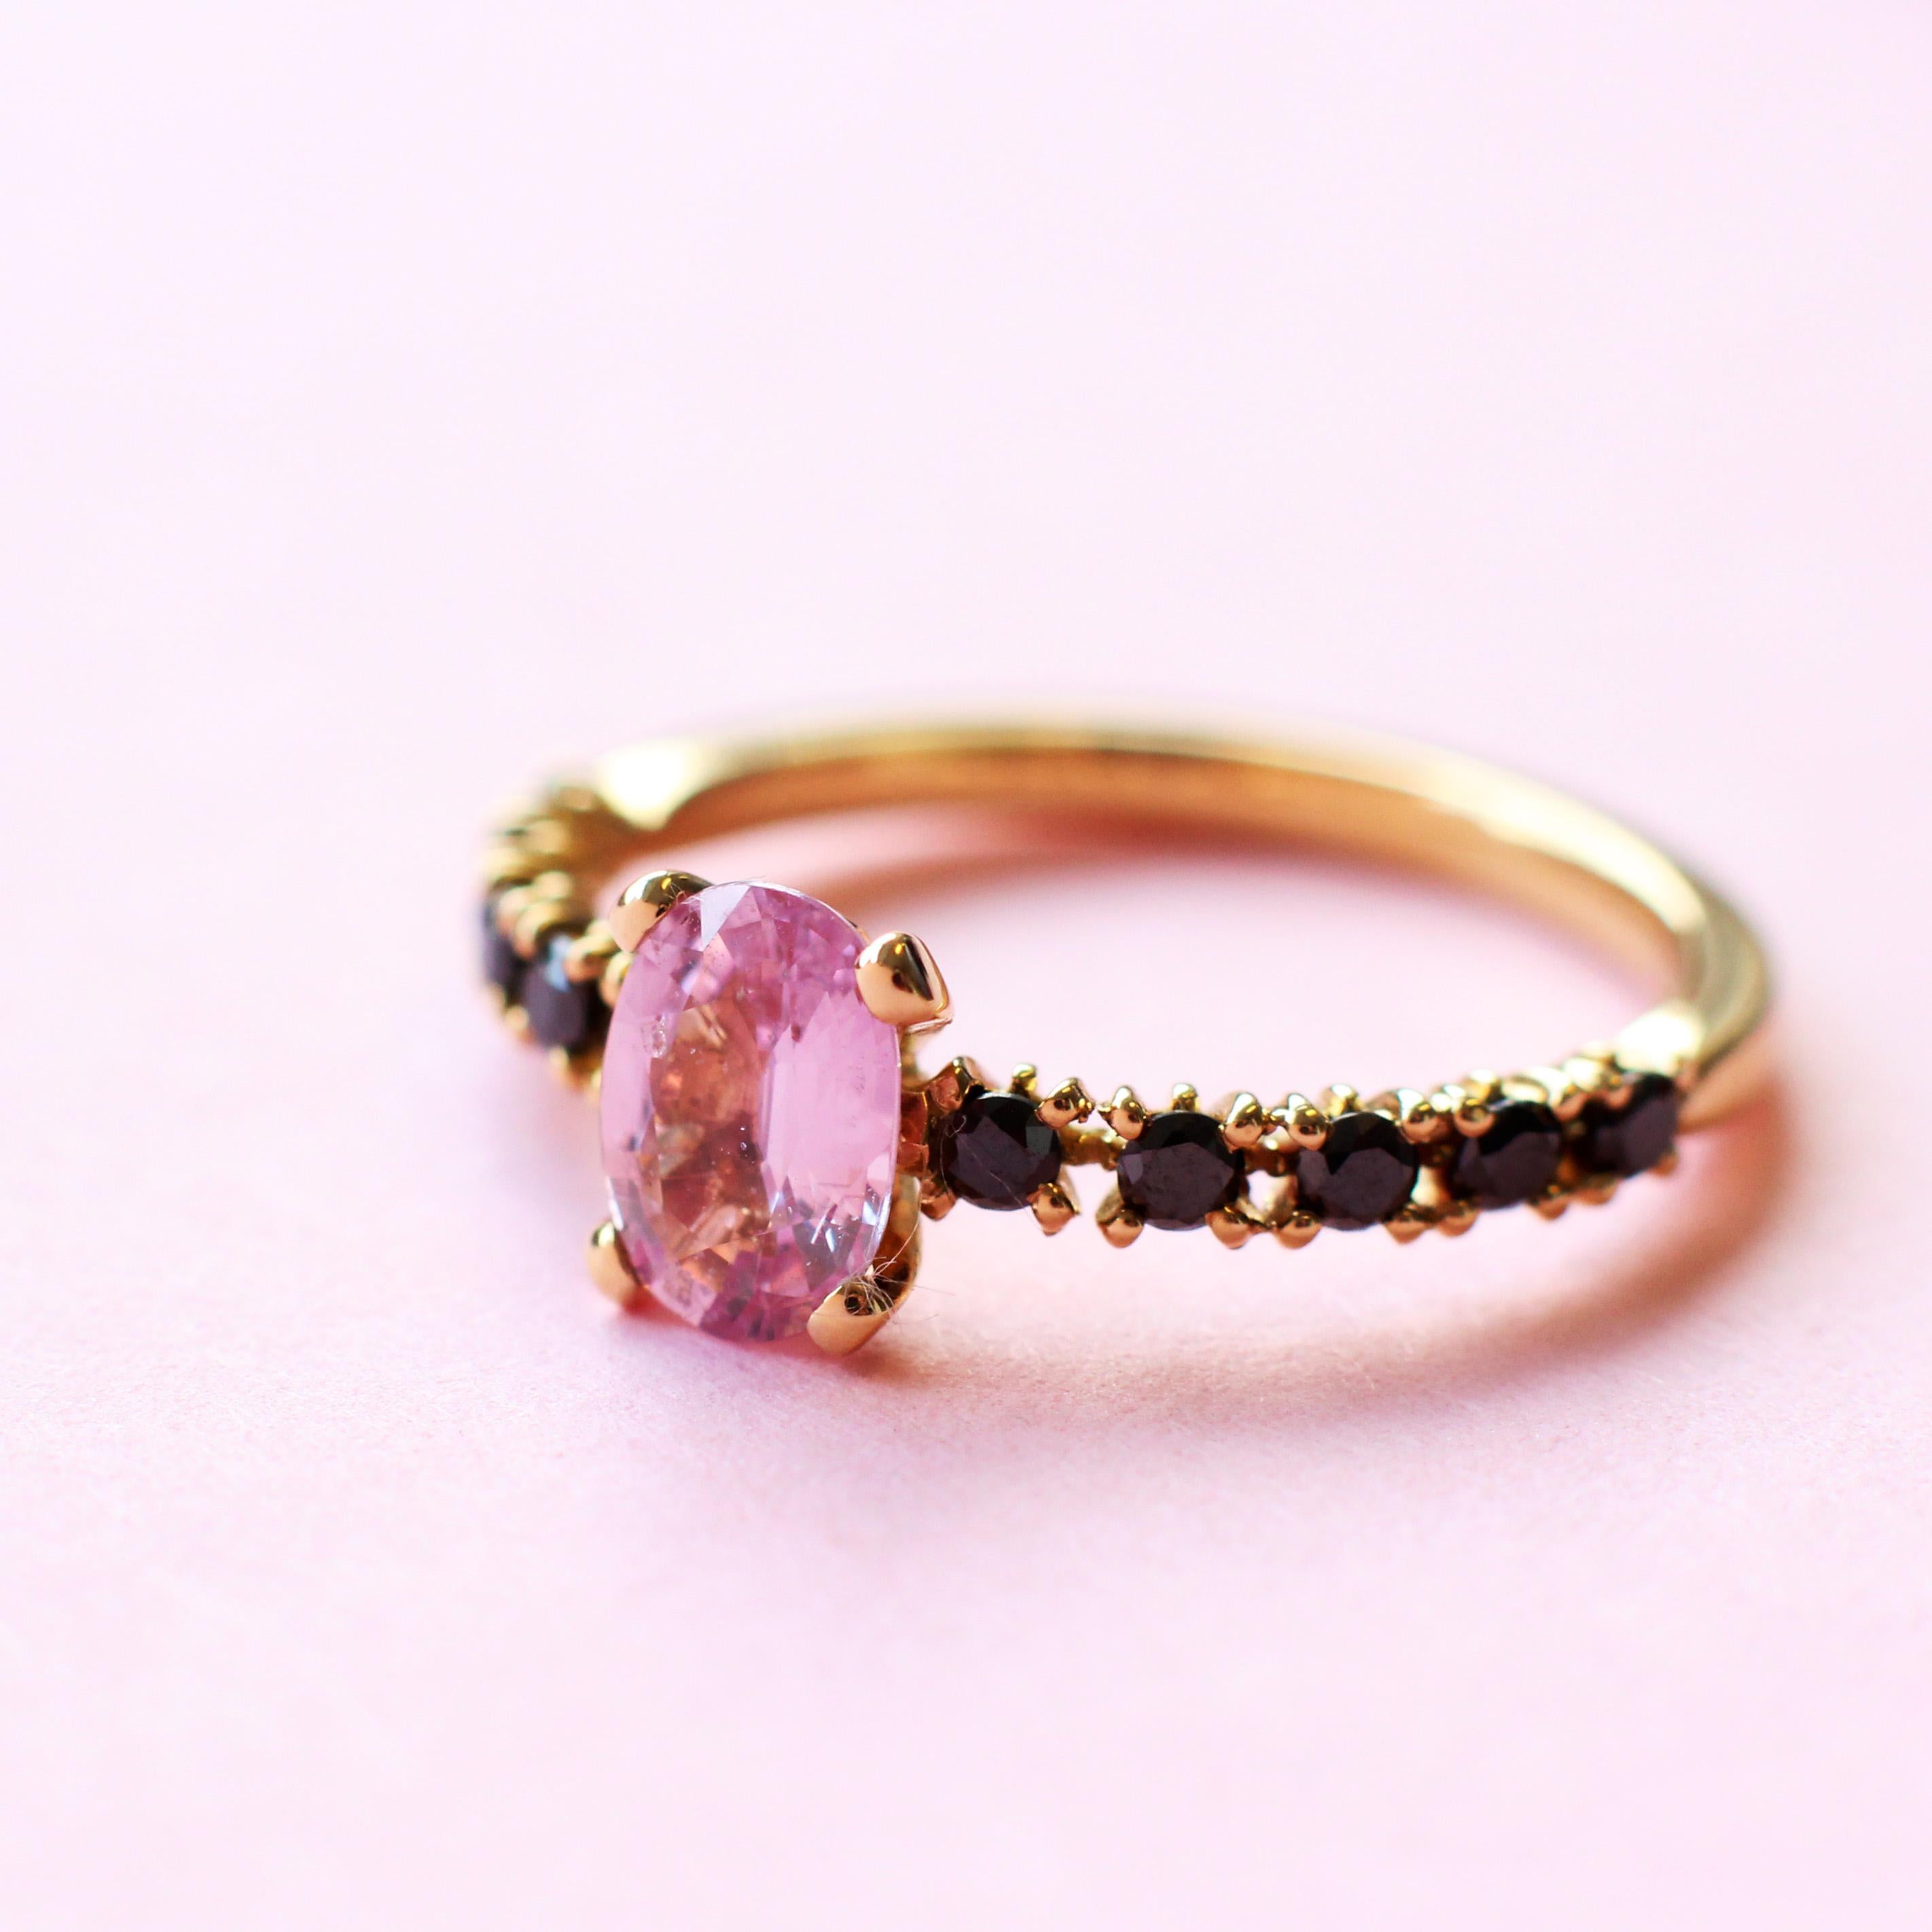 For Sale:  Pink Sapphire and Black Diamonds Solitaire Ring Set in 18 Karat Yellow Gold 7